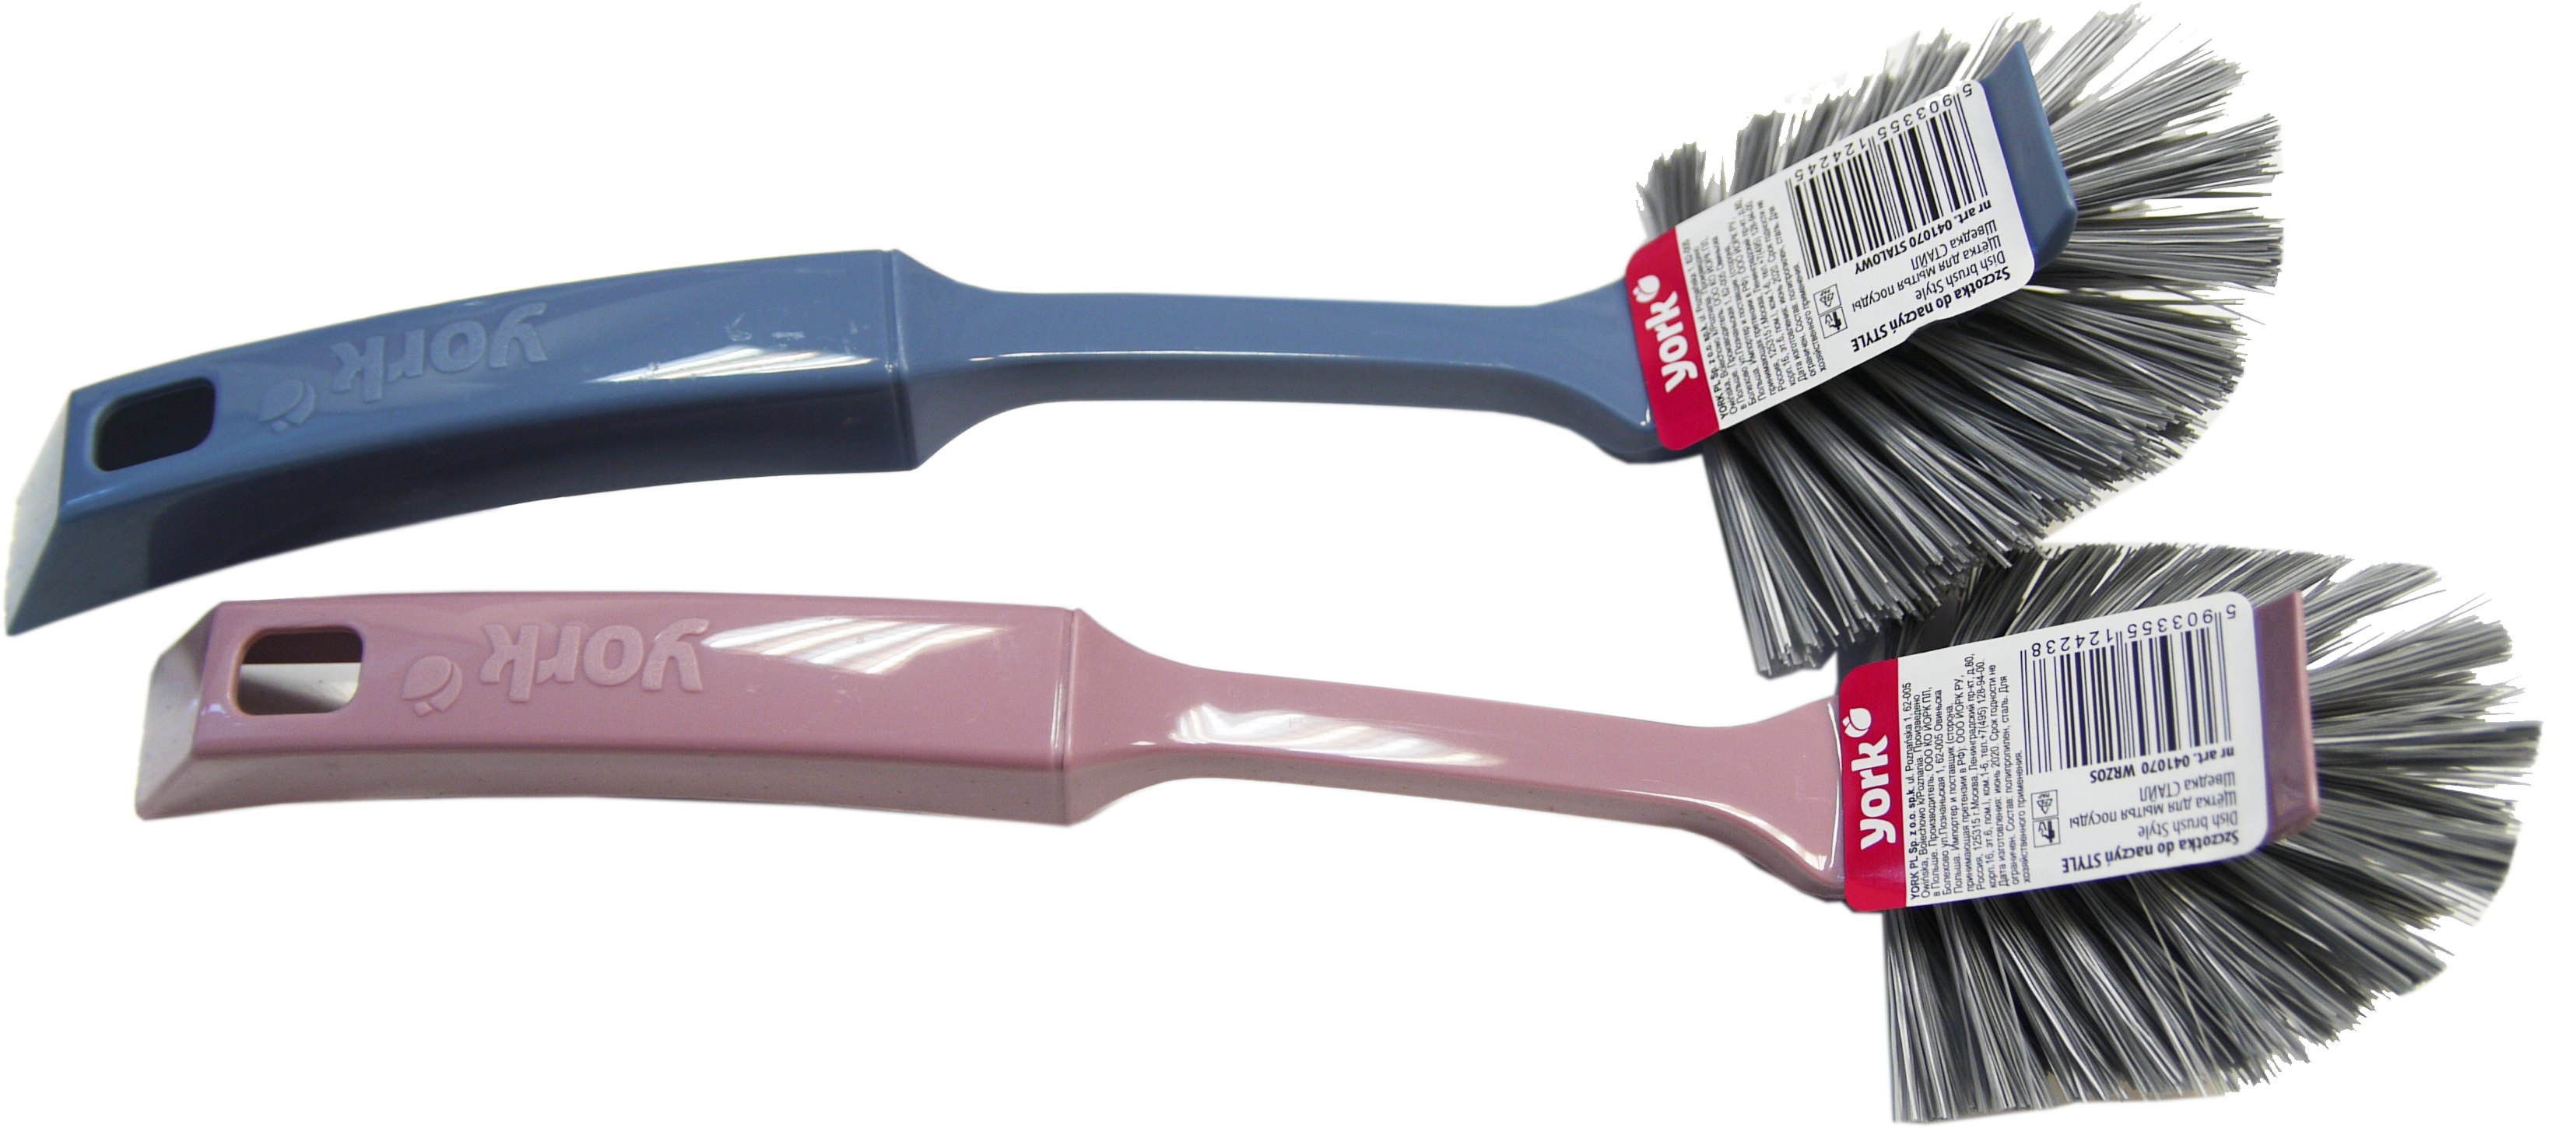 02309 - dish brush, 27 cm, oval with scraper, assorted colors